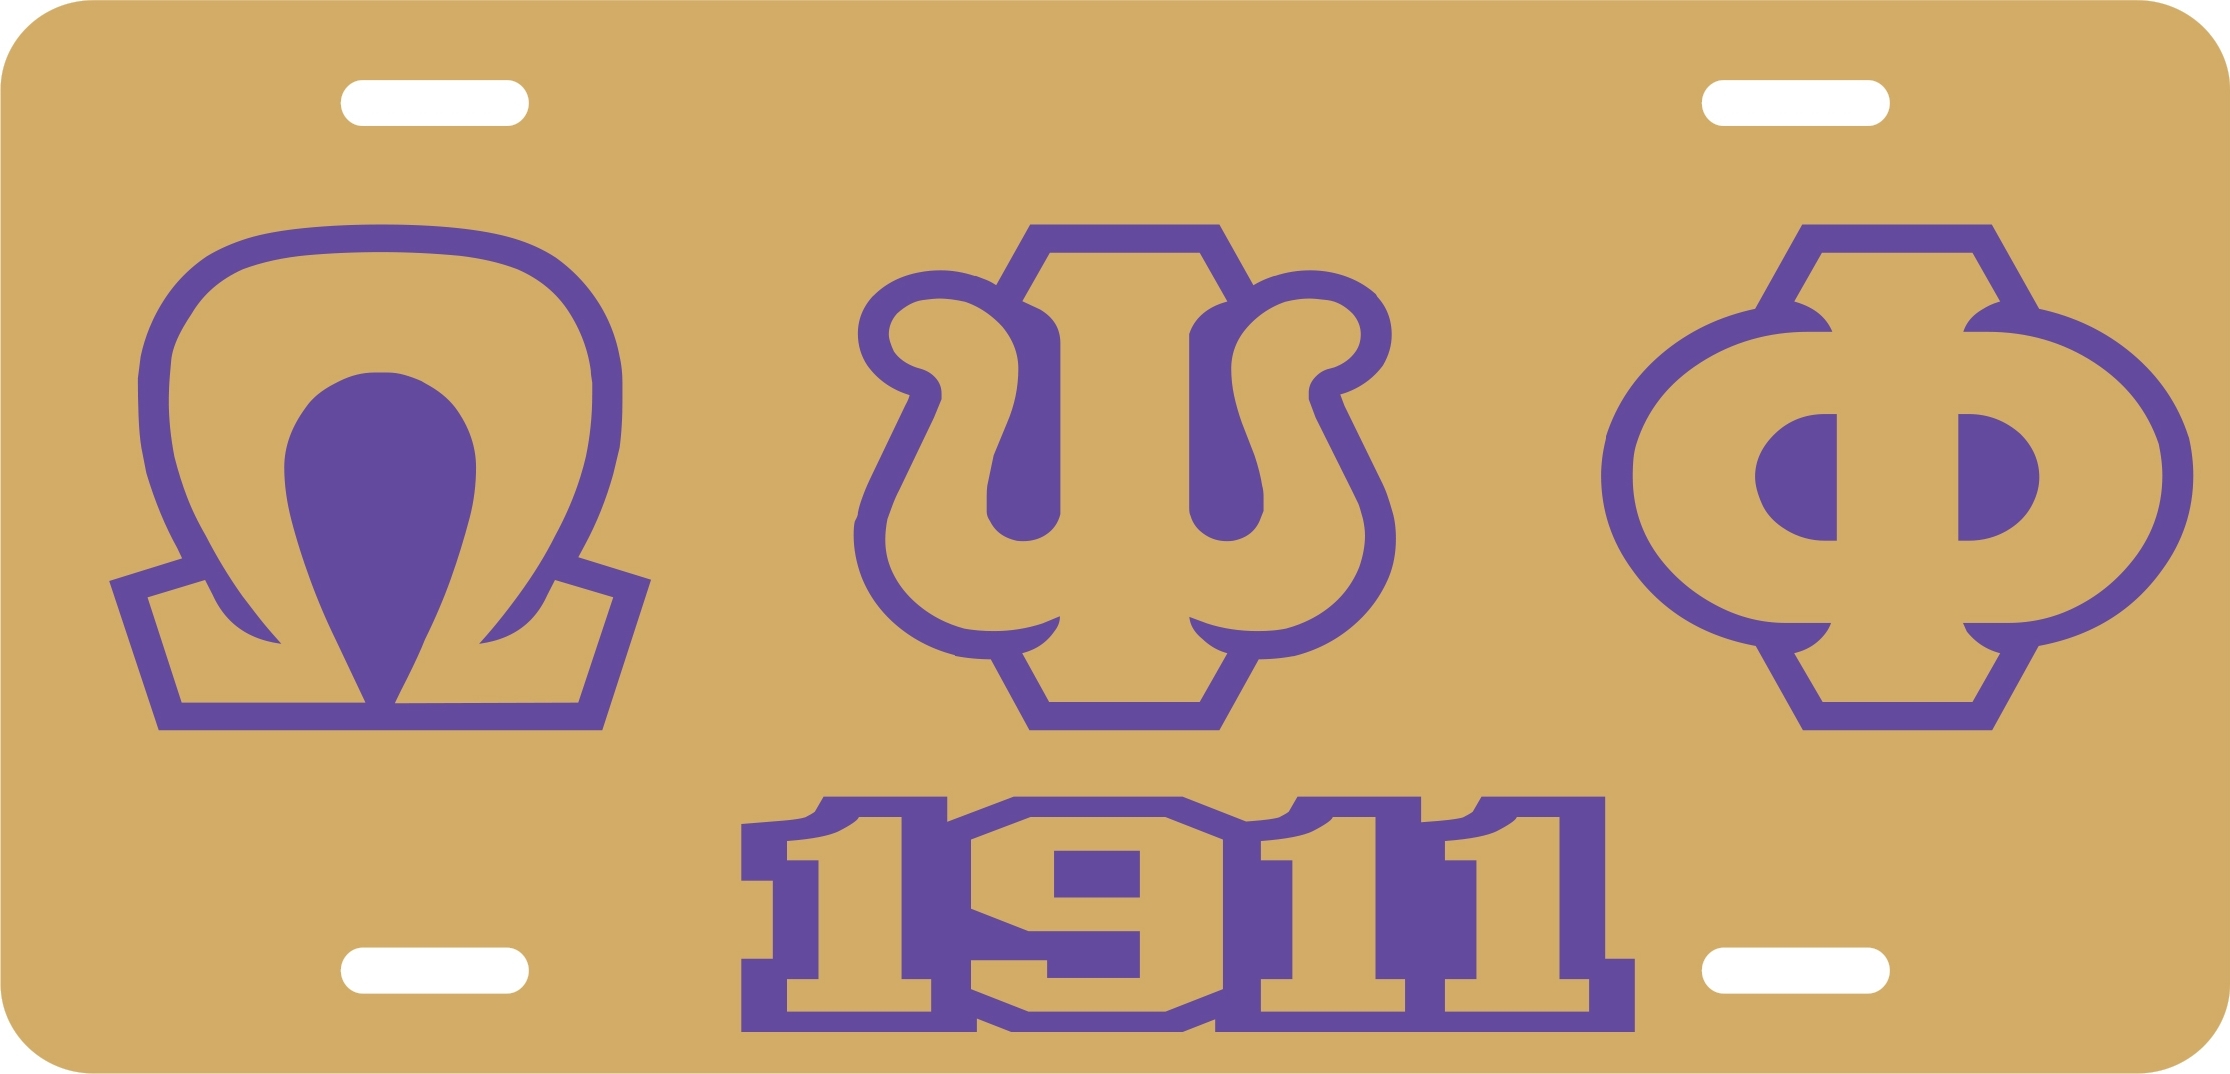 Omega Psi Phi 1911 Outline Mirror License Plate [Gold/Gold/Purple - Car ...